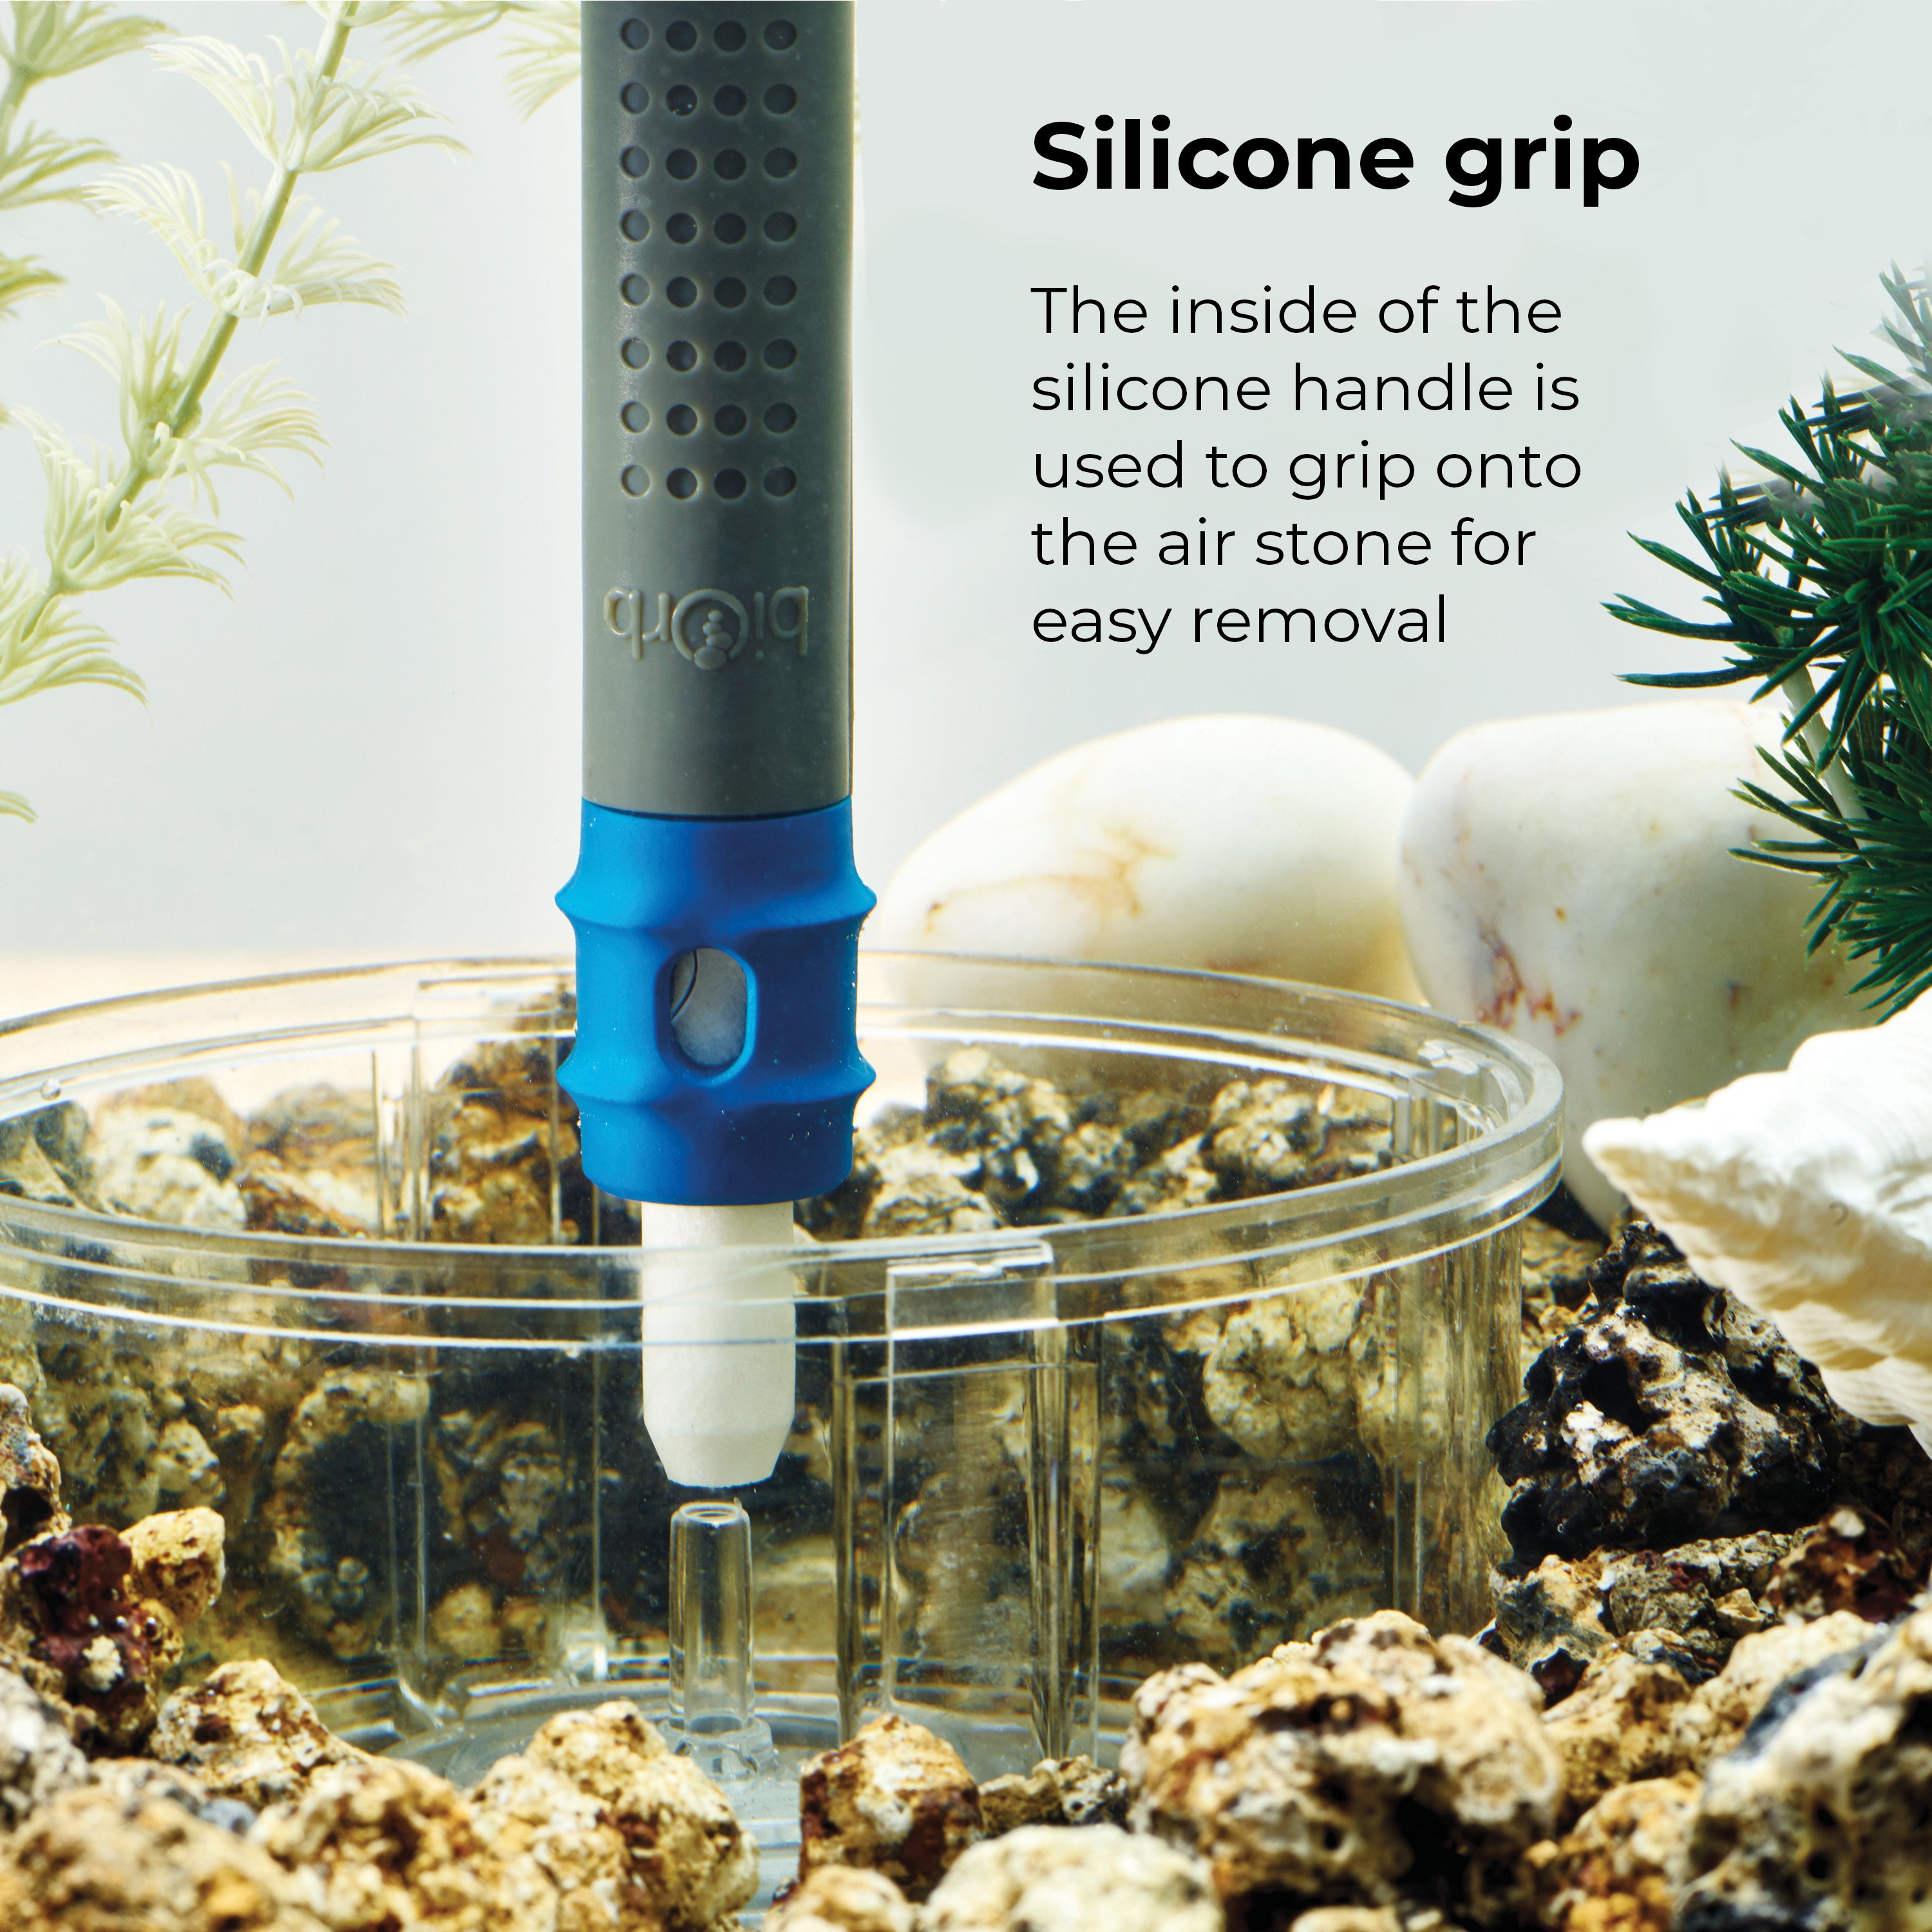 Multi-Cleaning Tool - Silicone grip